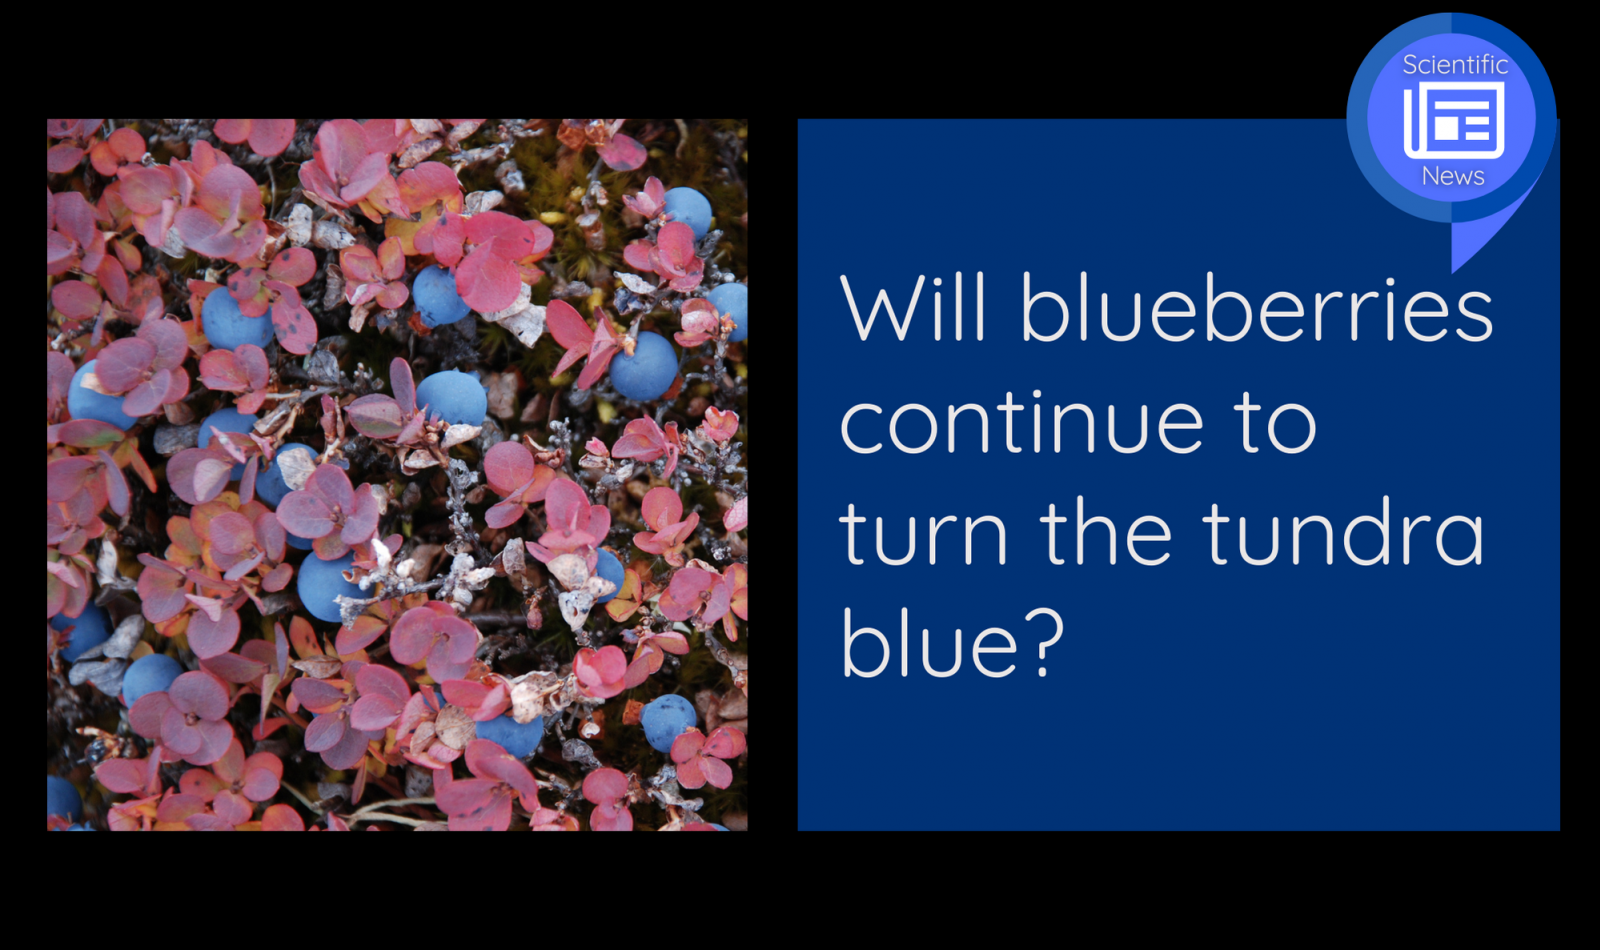 will-blueberries-continue-to-turn-the-tundra-blue